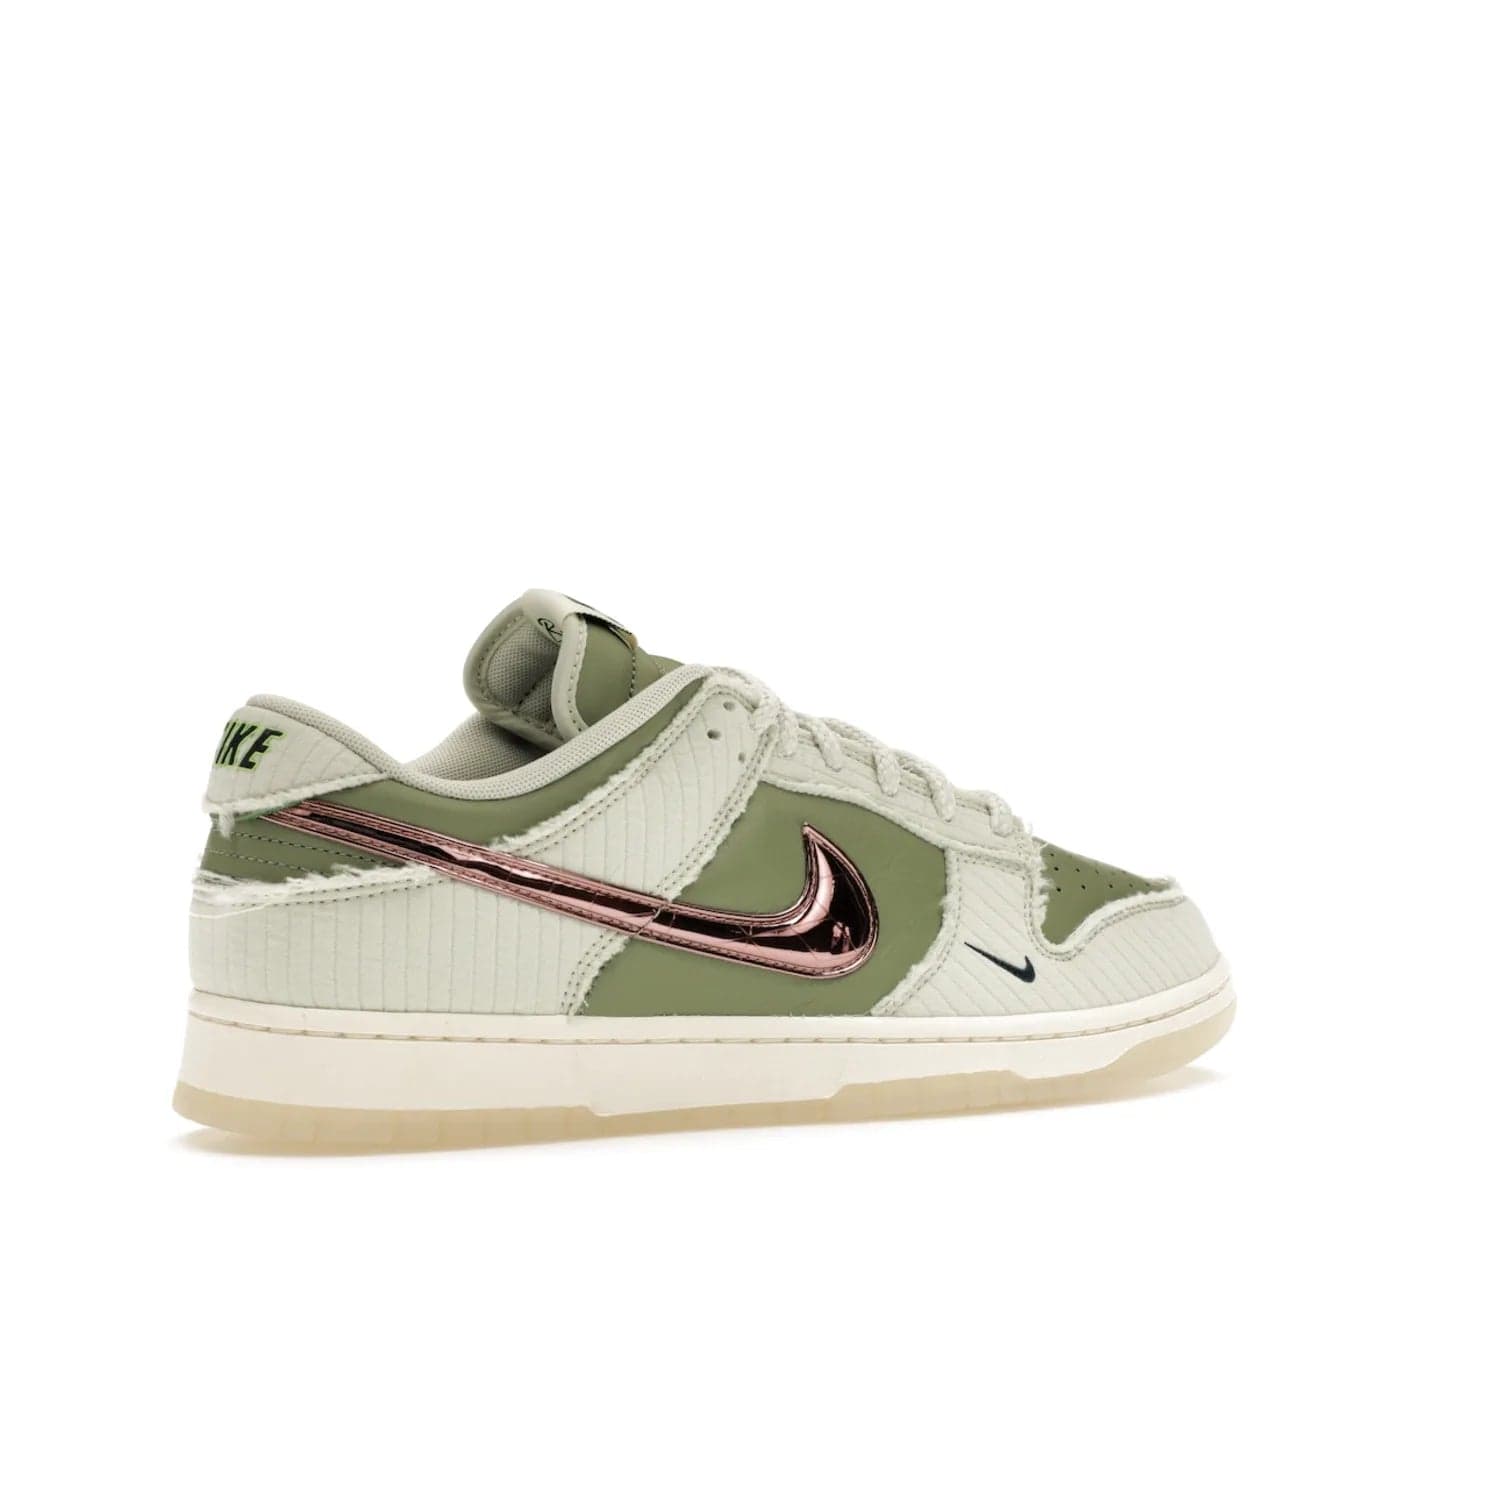 Nike Dunk Low Retro PRM Kyler Murray Be 1 of One - Image 34 - Only at www.BallersClubKickz.com - Introducing the Nike Dunk Low Retro PRM Kyler Murray "Be 1 of One"! A Sea Glass upper with Sail and Oil Green accents, finished with Rose Gold accents. Drop date: November 10th.